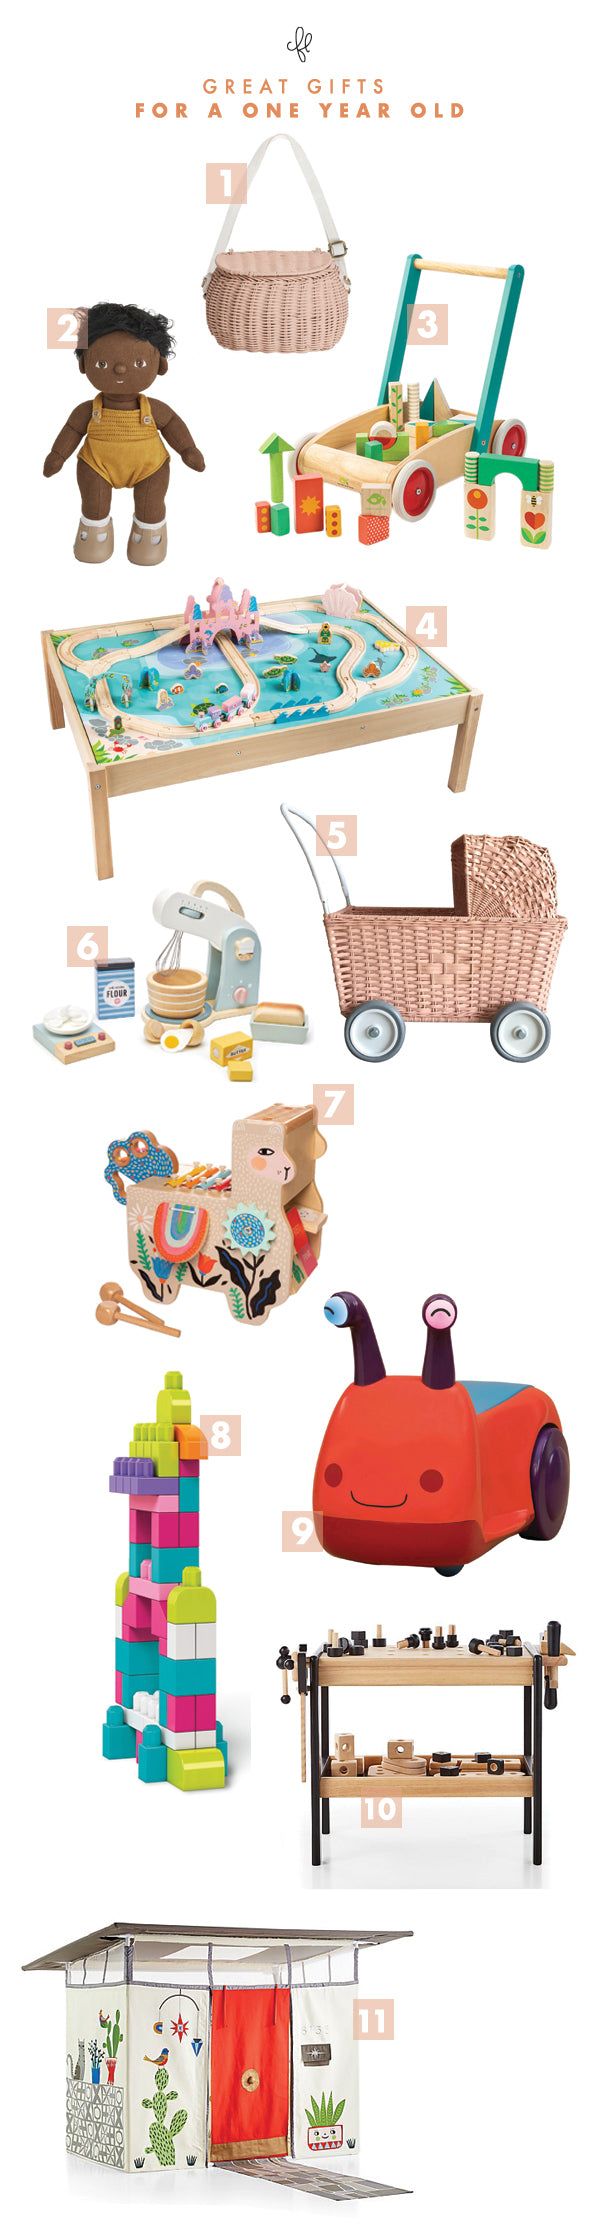 Gift Guide for One-Year Olds